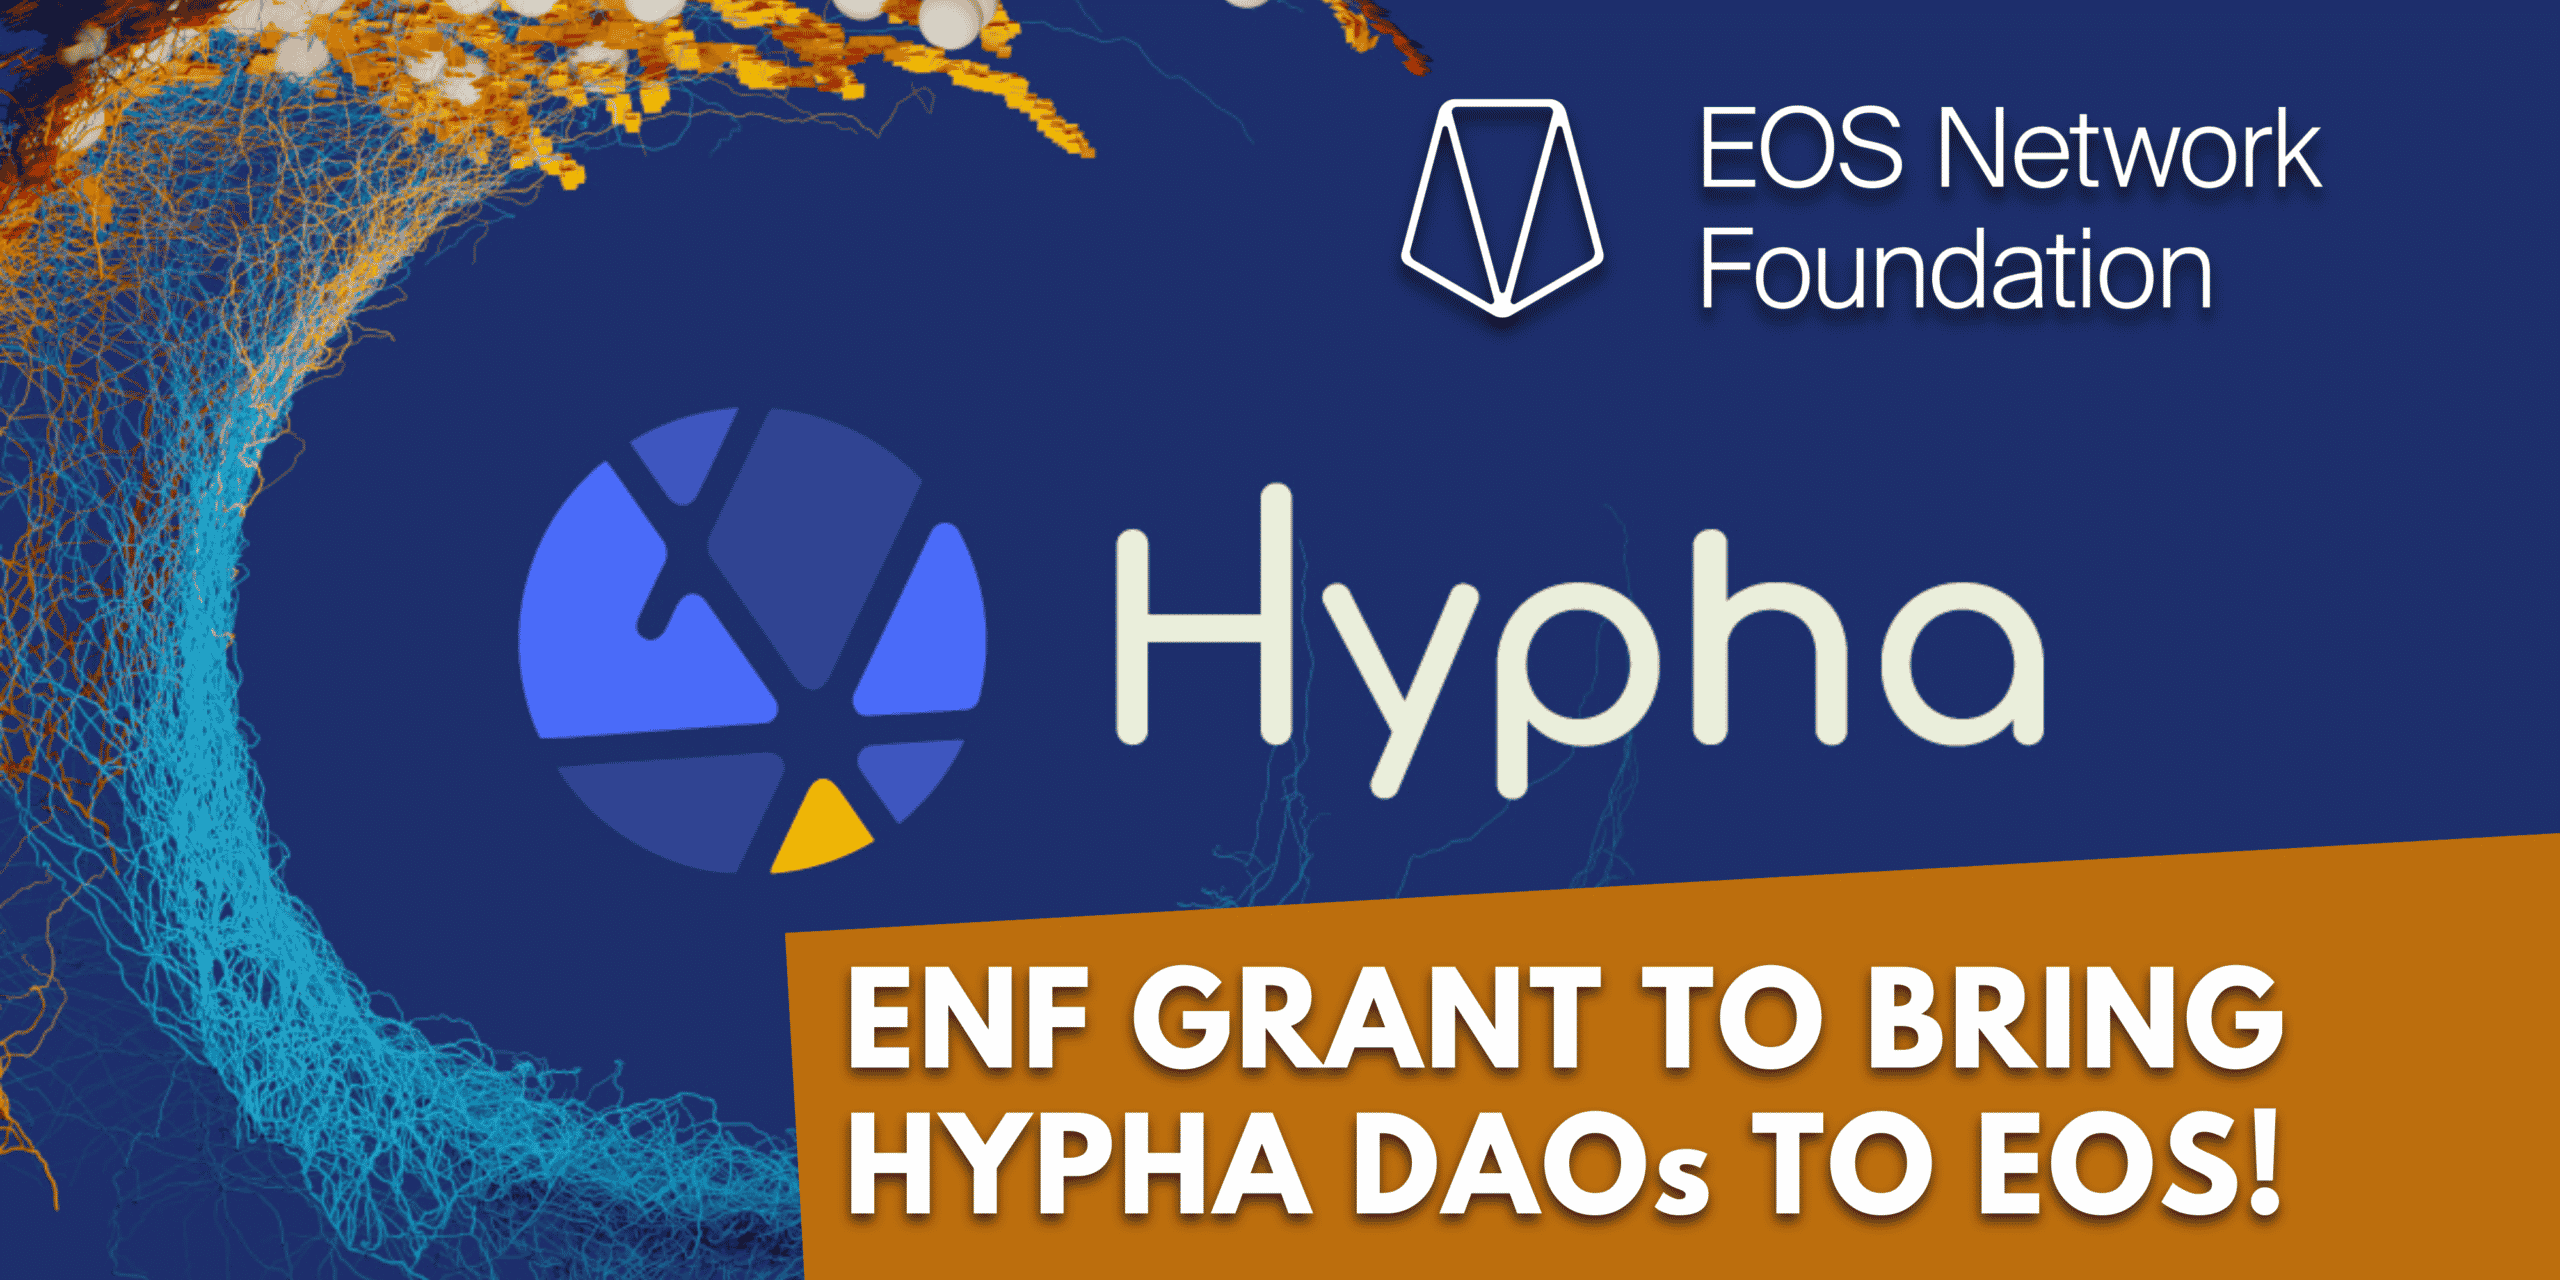 Hypha DAO’s “Organization-in-a-Box Solution” Coming to EOS Community Through an ENF Grant!